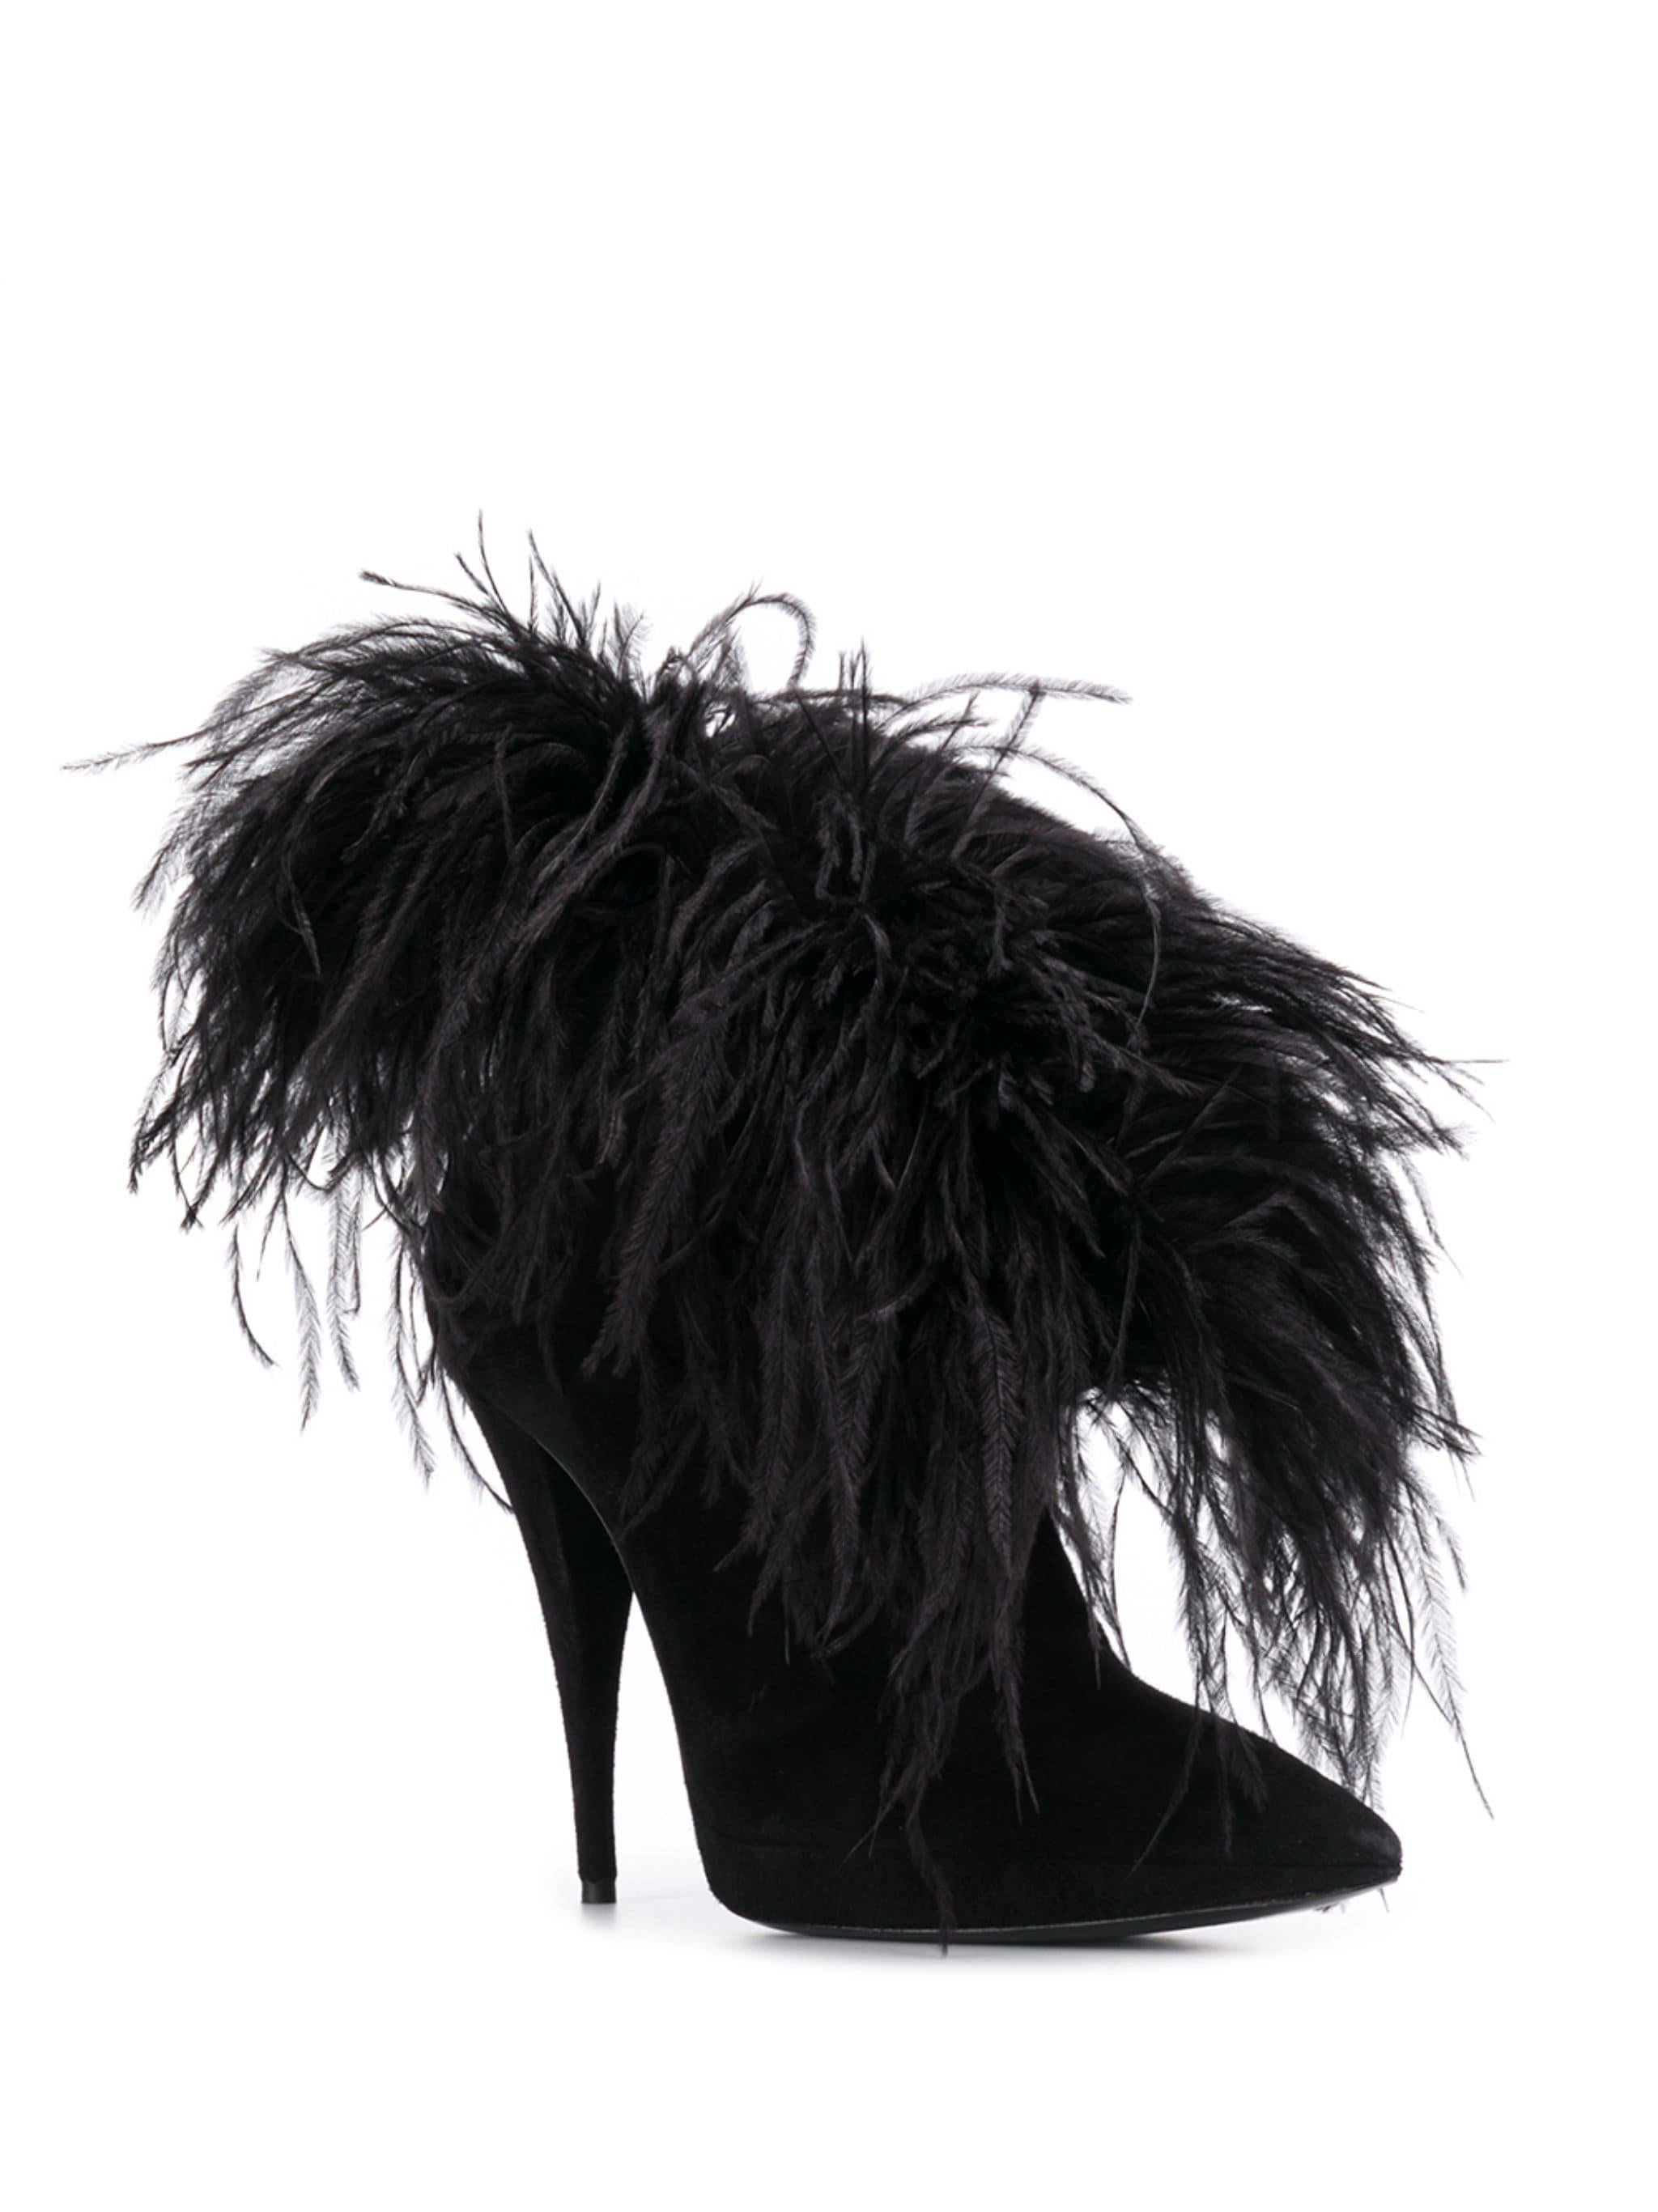 Saint Laurent Zizi 110 Black Suede High Stiletto Heel Ankle Boot

Saint Laurent's FW19 runway show saw legs take center stage, with models wearing tiny shorts and mini skirts – the perfect choice to show off this season's statement footwear. Crafted